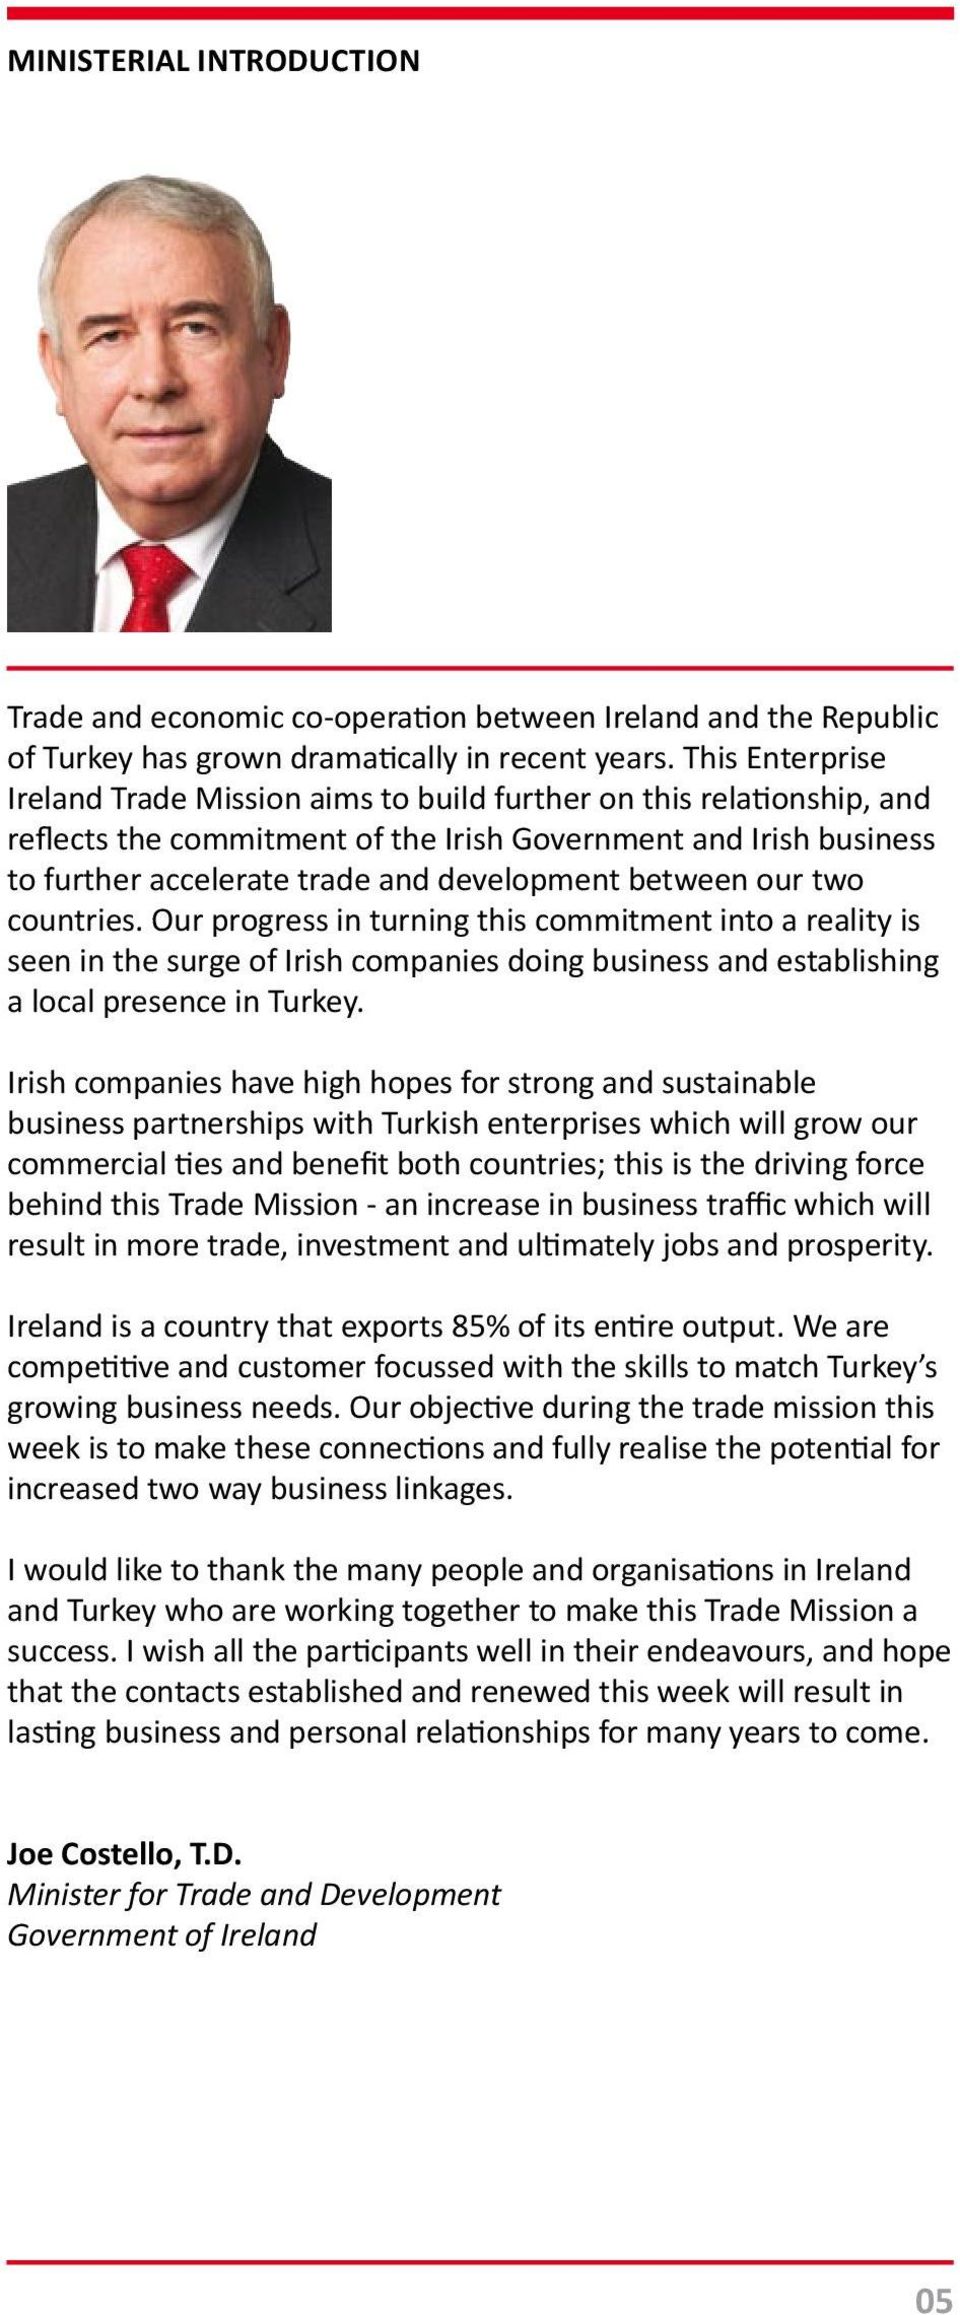 between our two countries. Our progress in turning this commitment into a reality is seen in the surge of Irish companies doing business and establishing a local presence in Turkey.